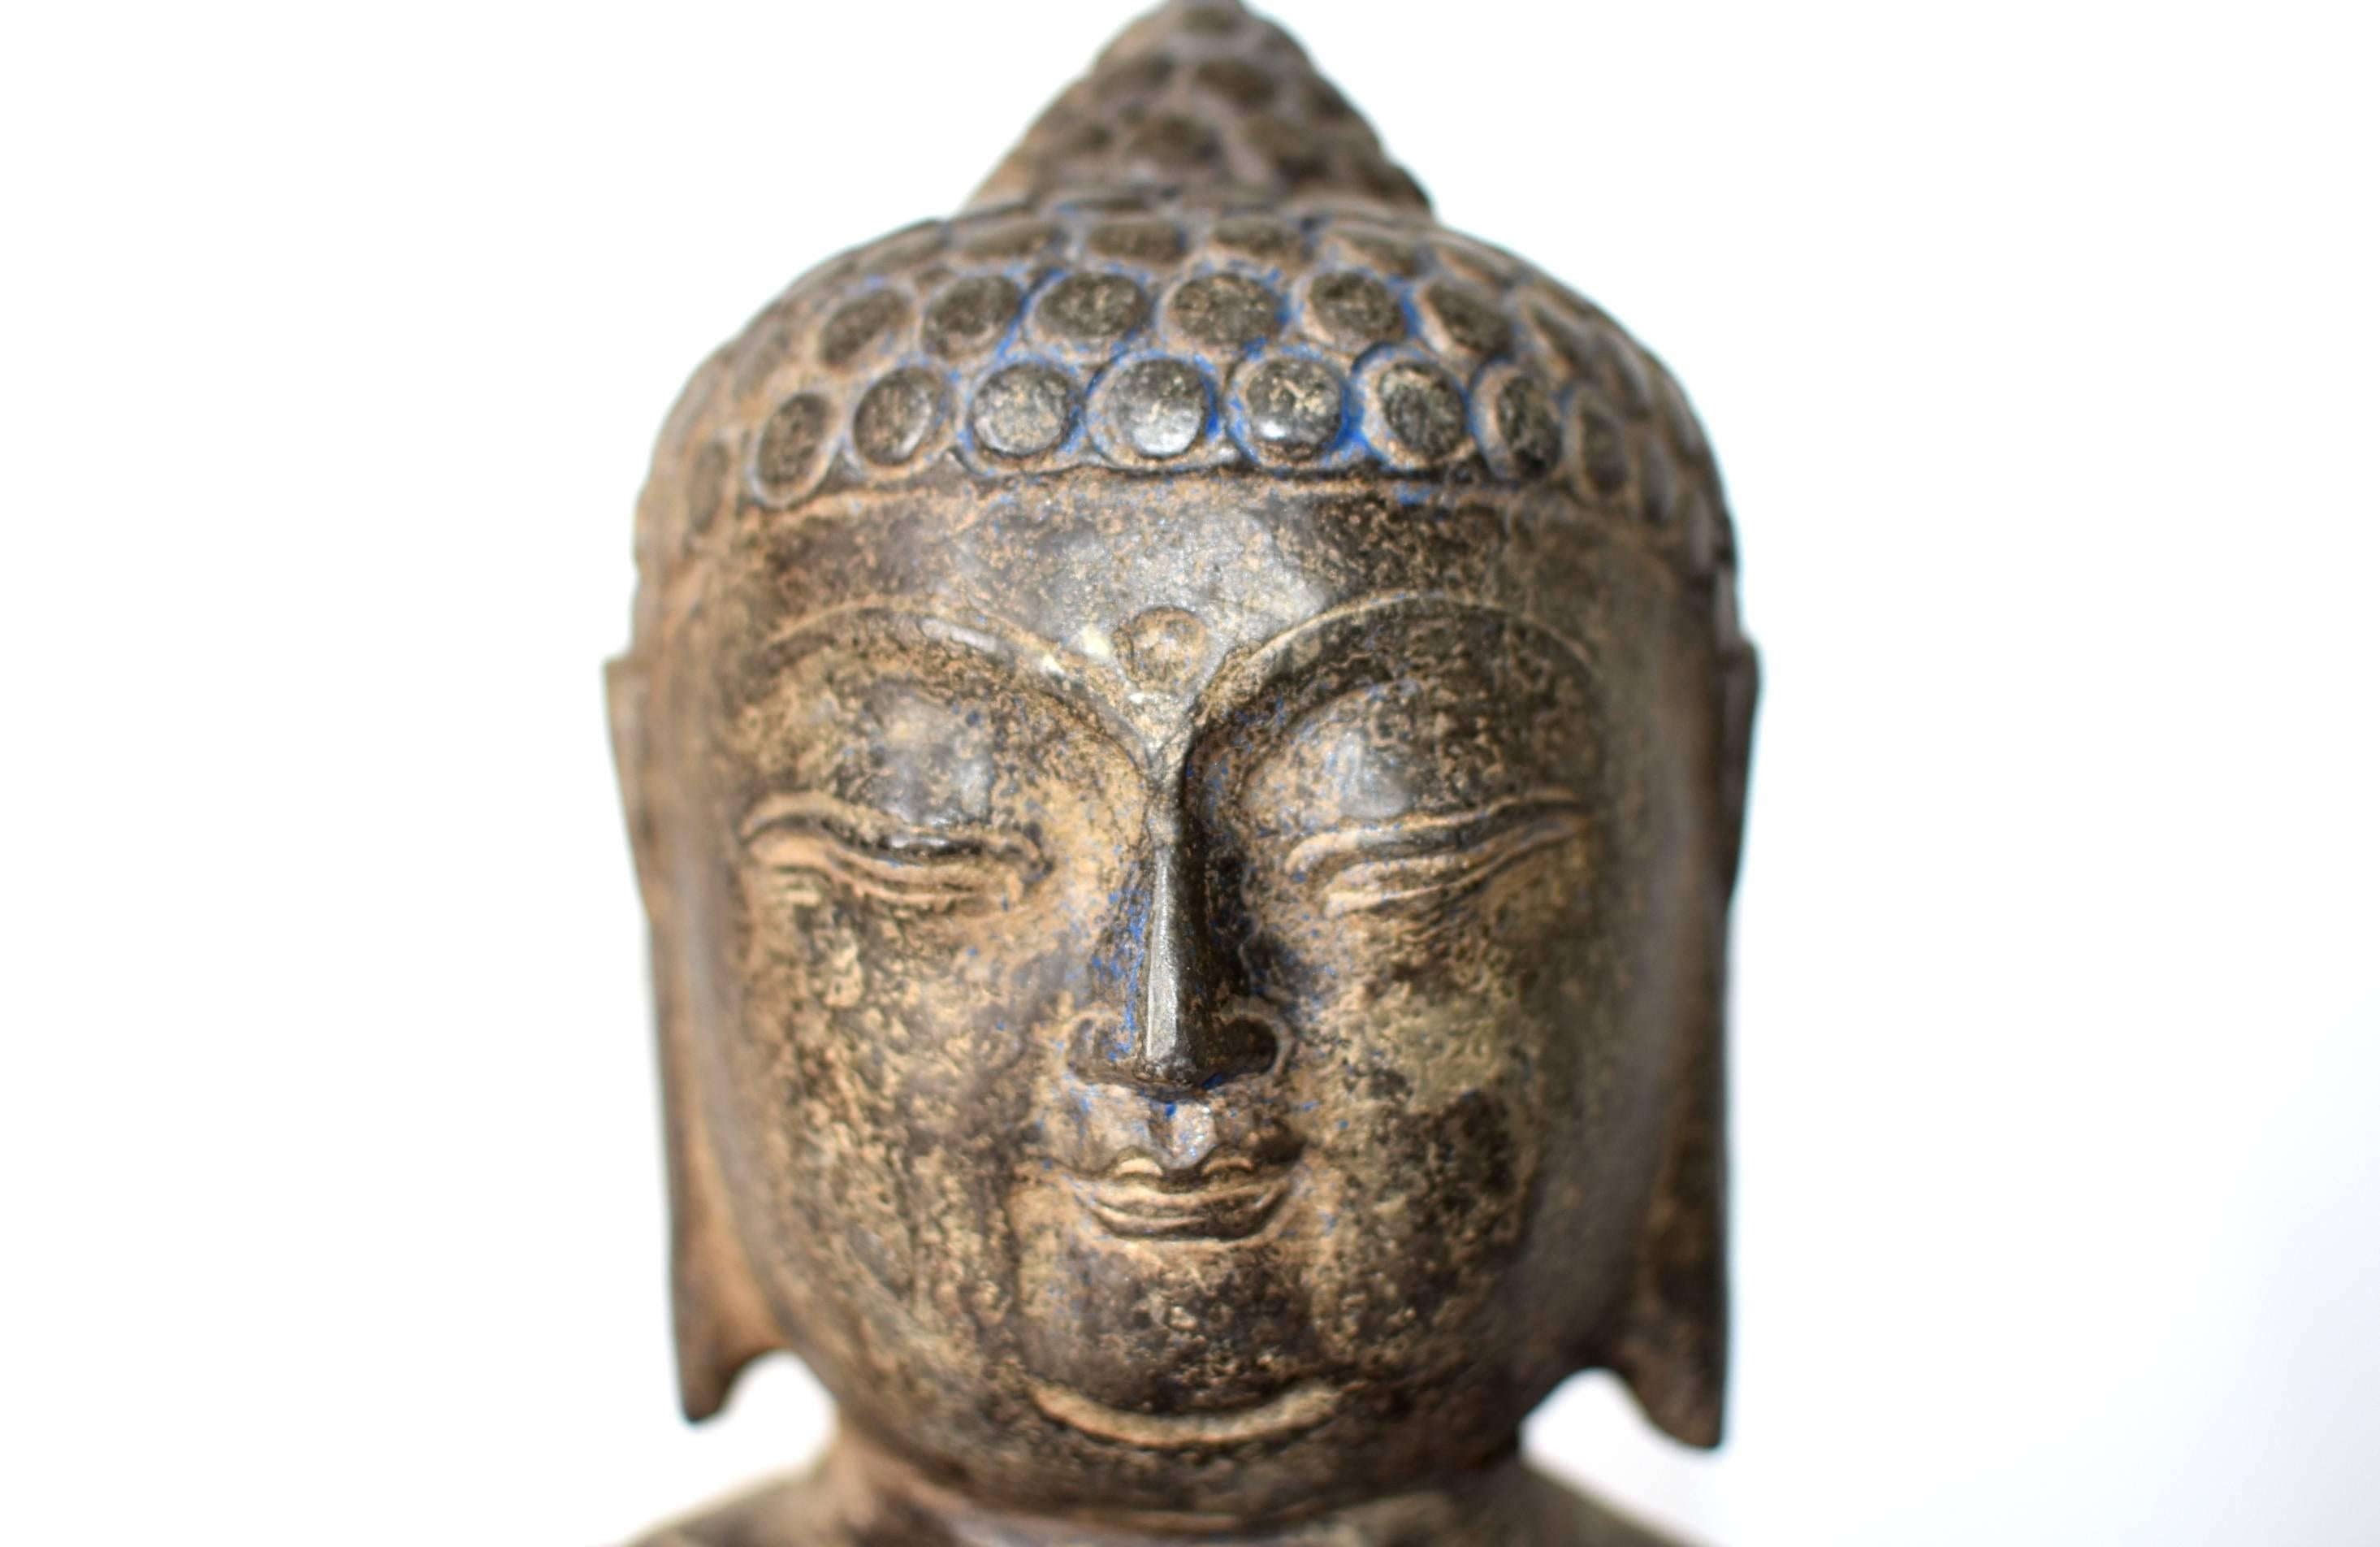 This is a large solid stone Buddha sculpture. The Buddha has a young, full face with swirled hair and long earlobes, all in Tang dynasty style. His expression is calm and peaceful. This hand carved sculpture depicts Buddha in a seating position,